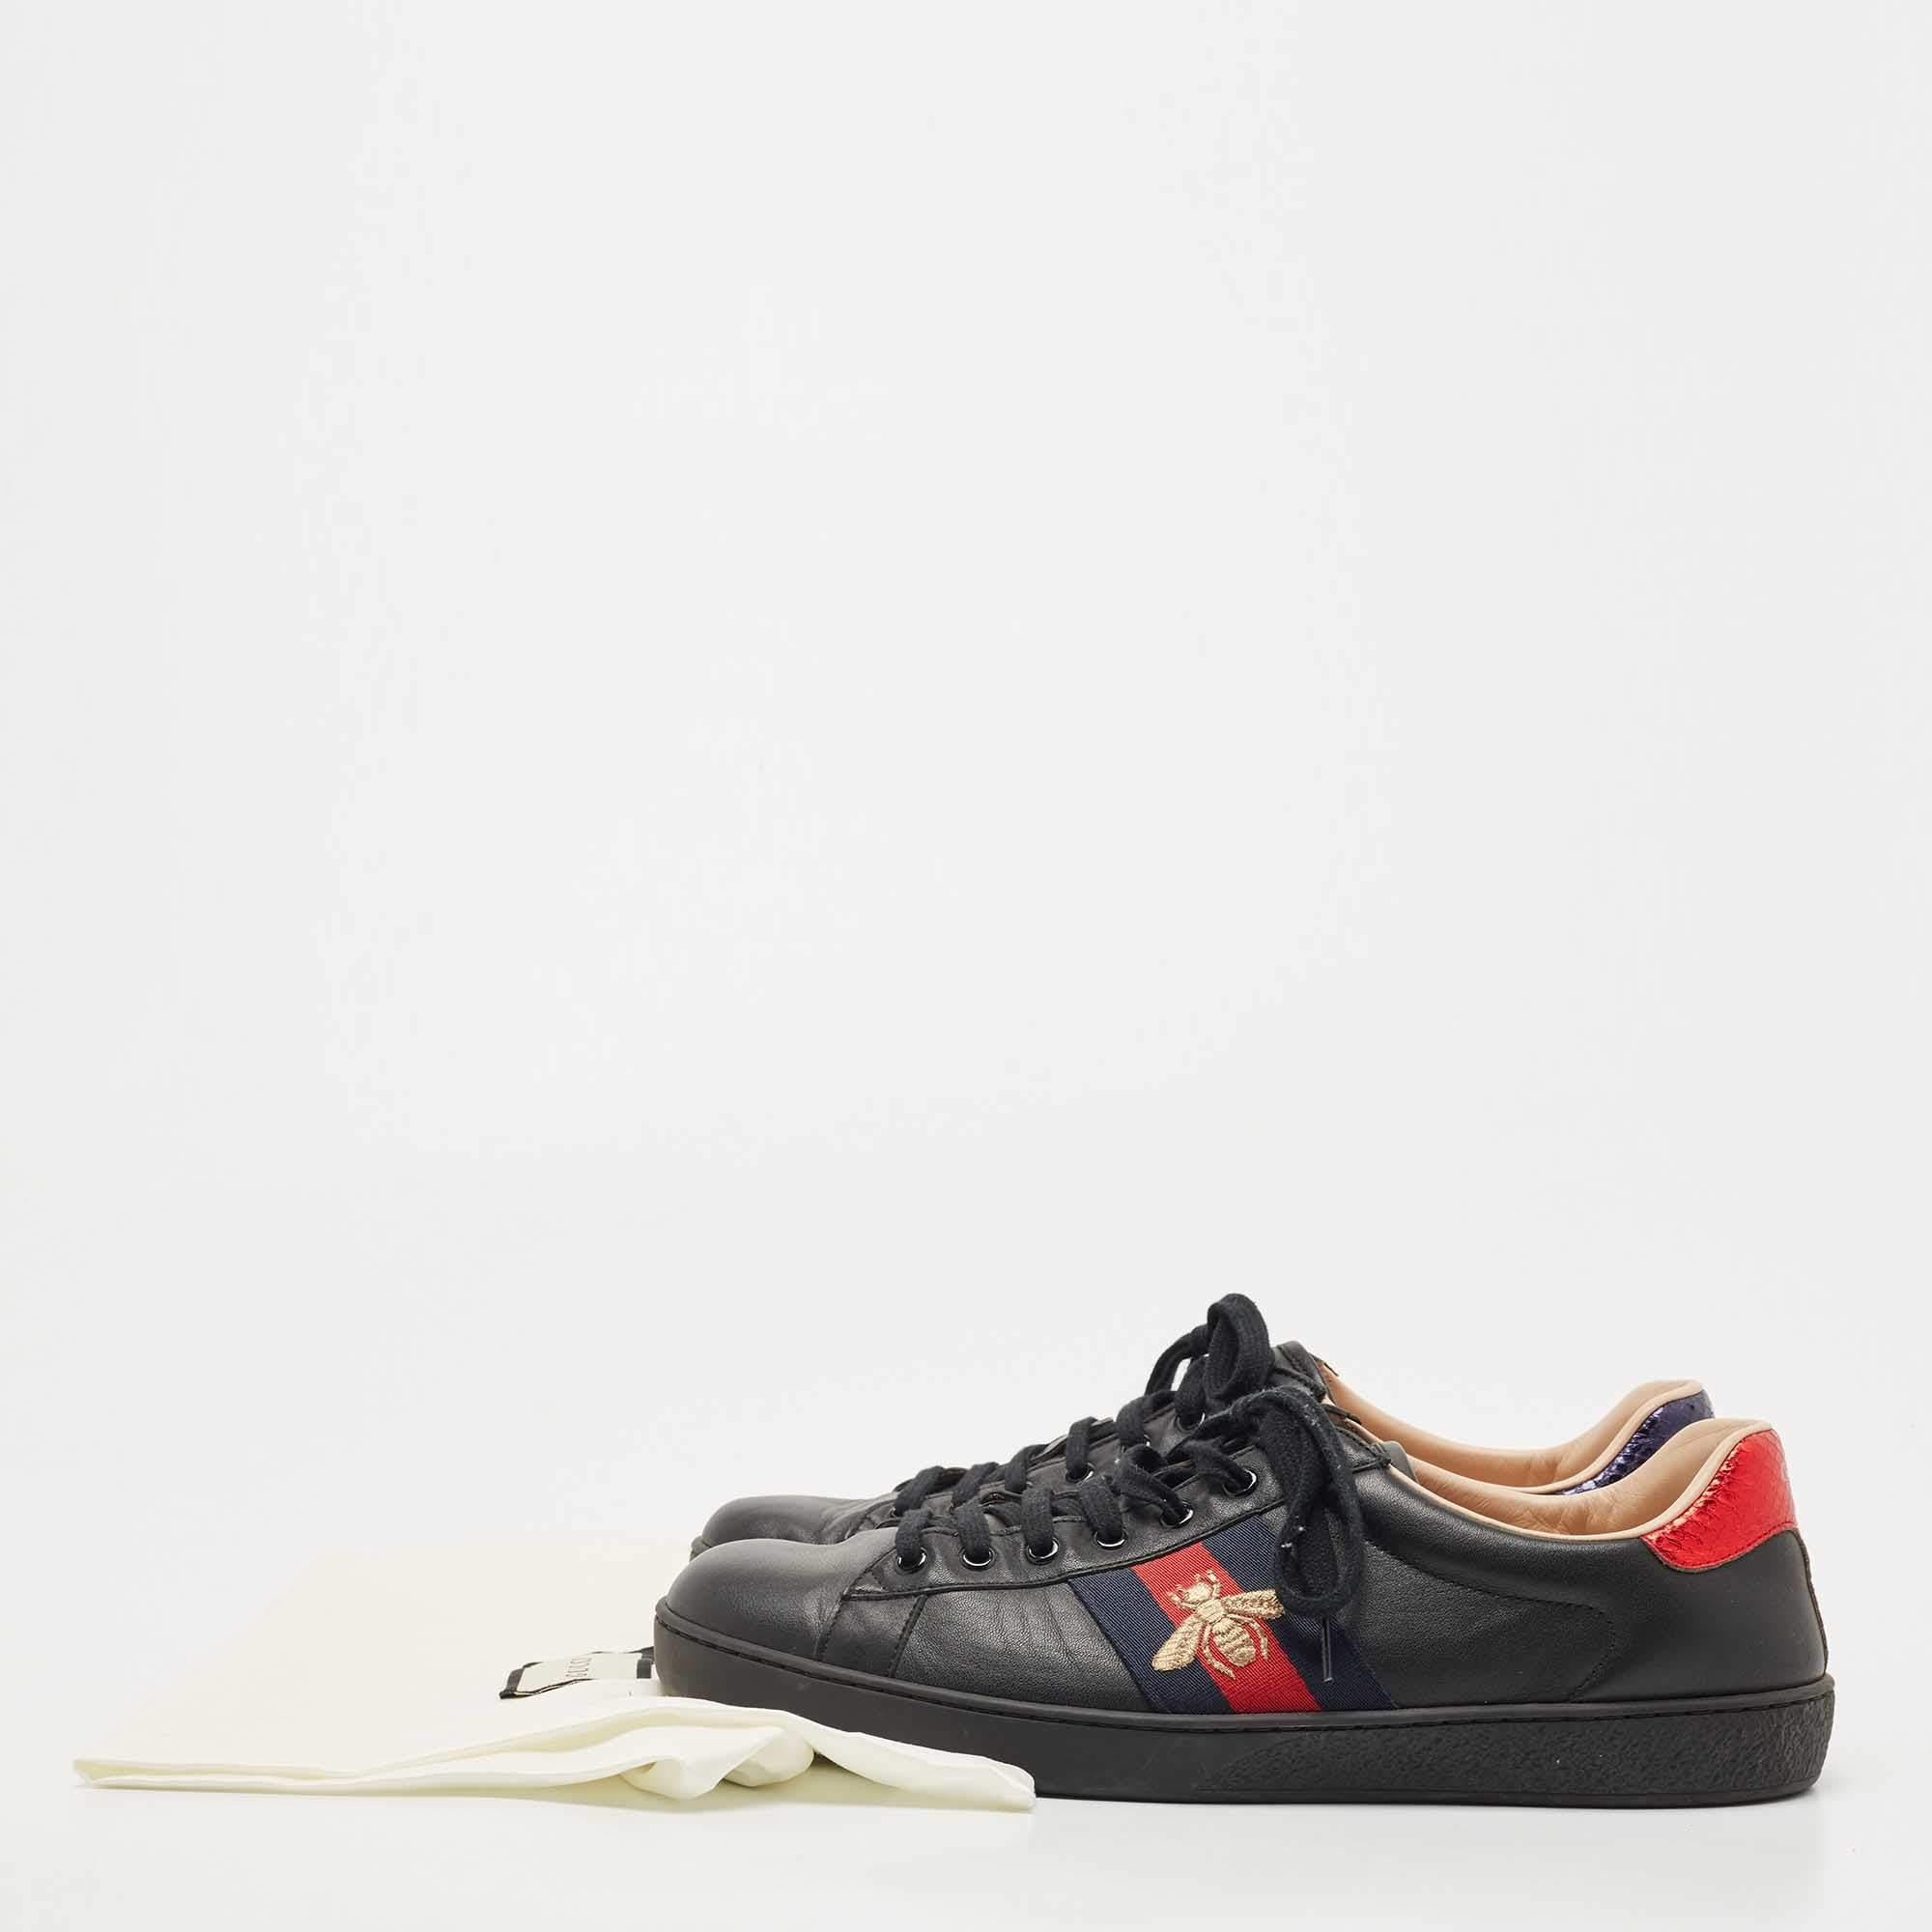 Gucci Black Leather Ace Low Top Sneakers Size 44 4